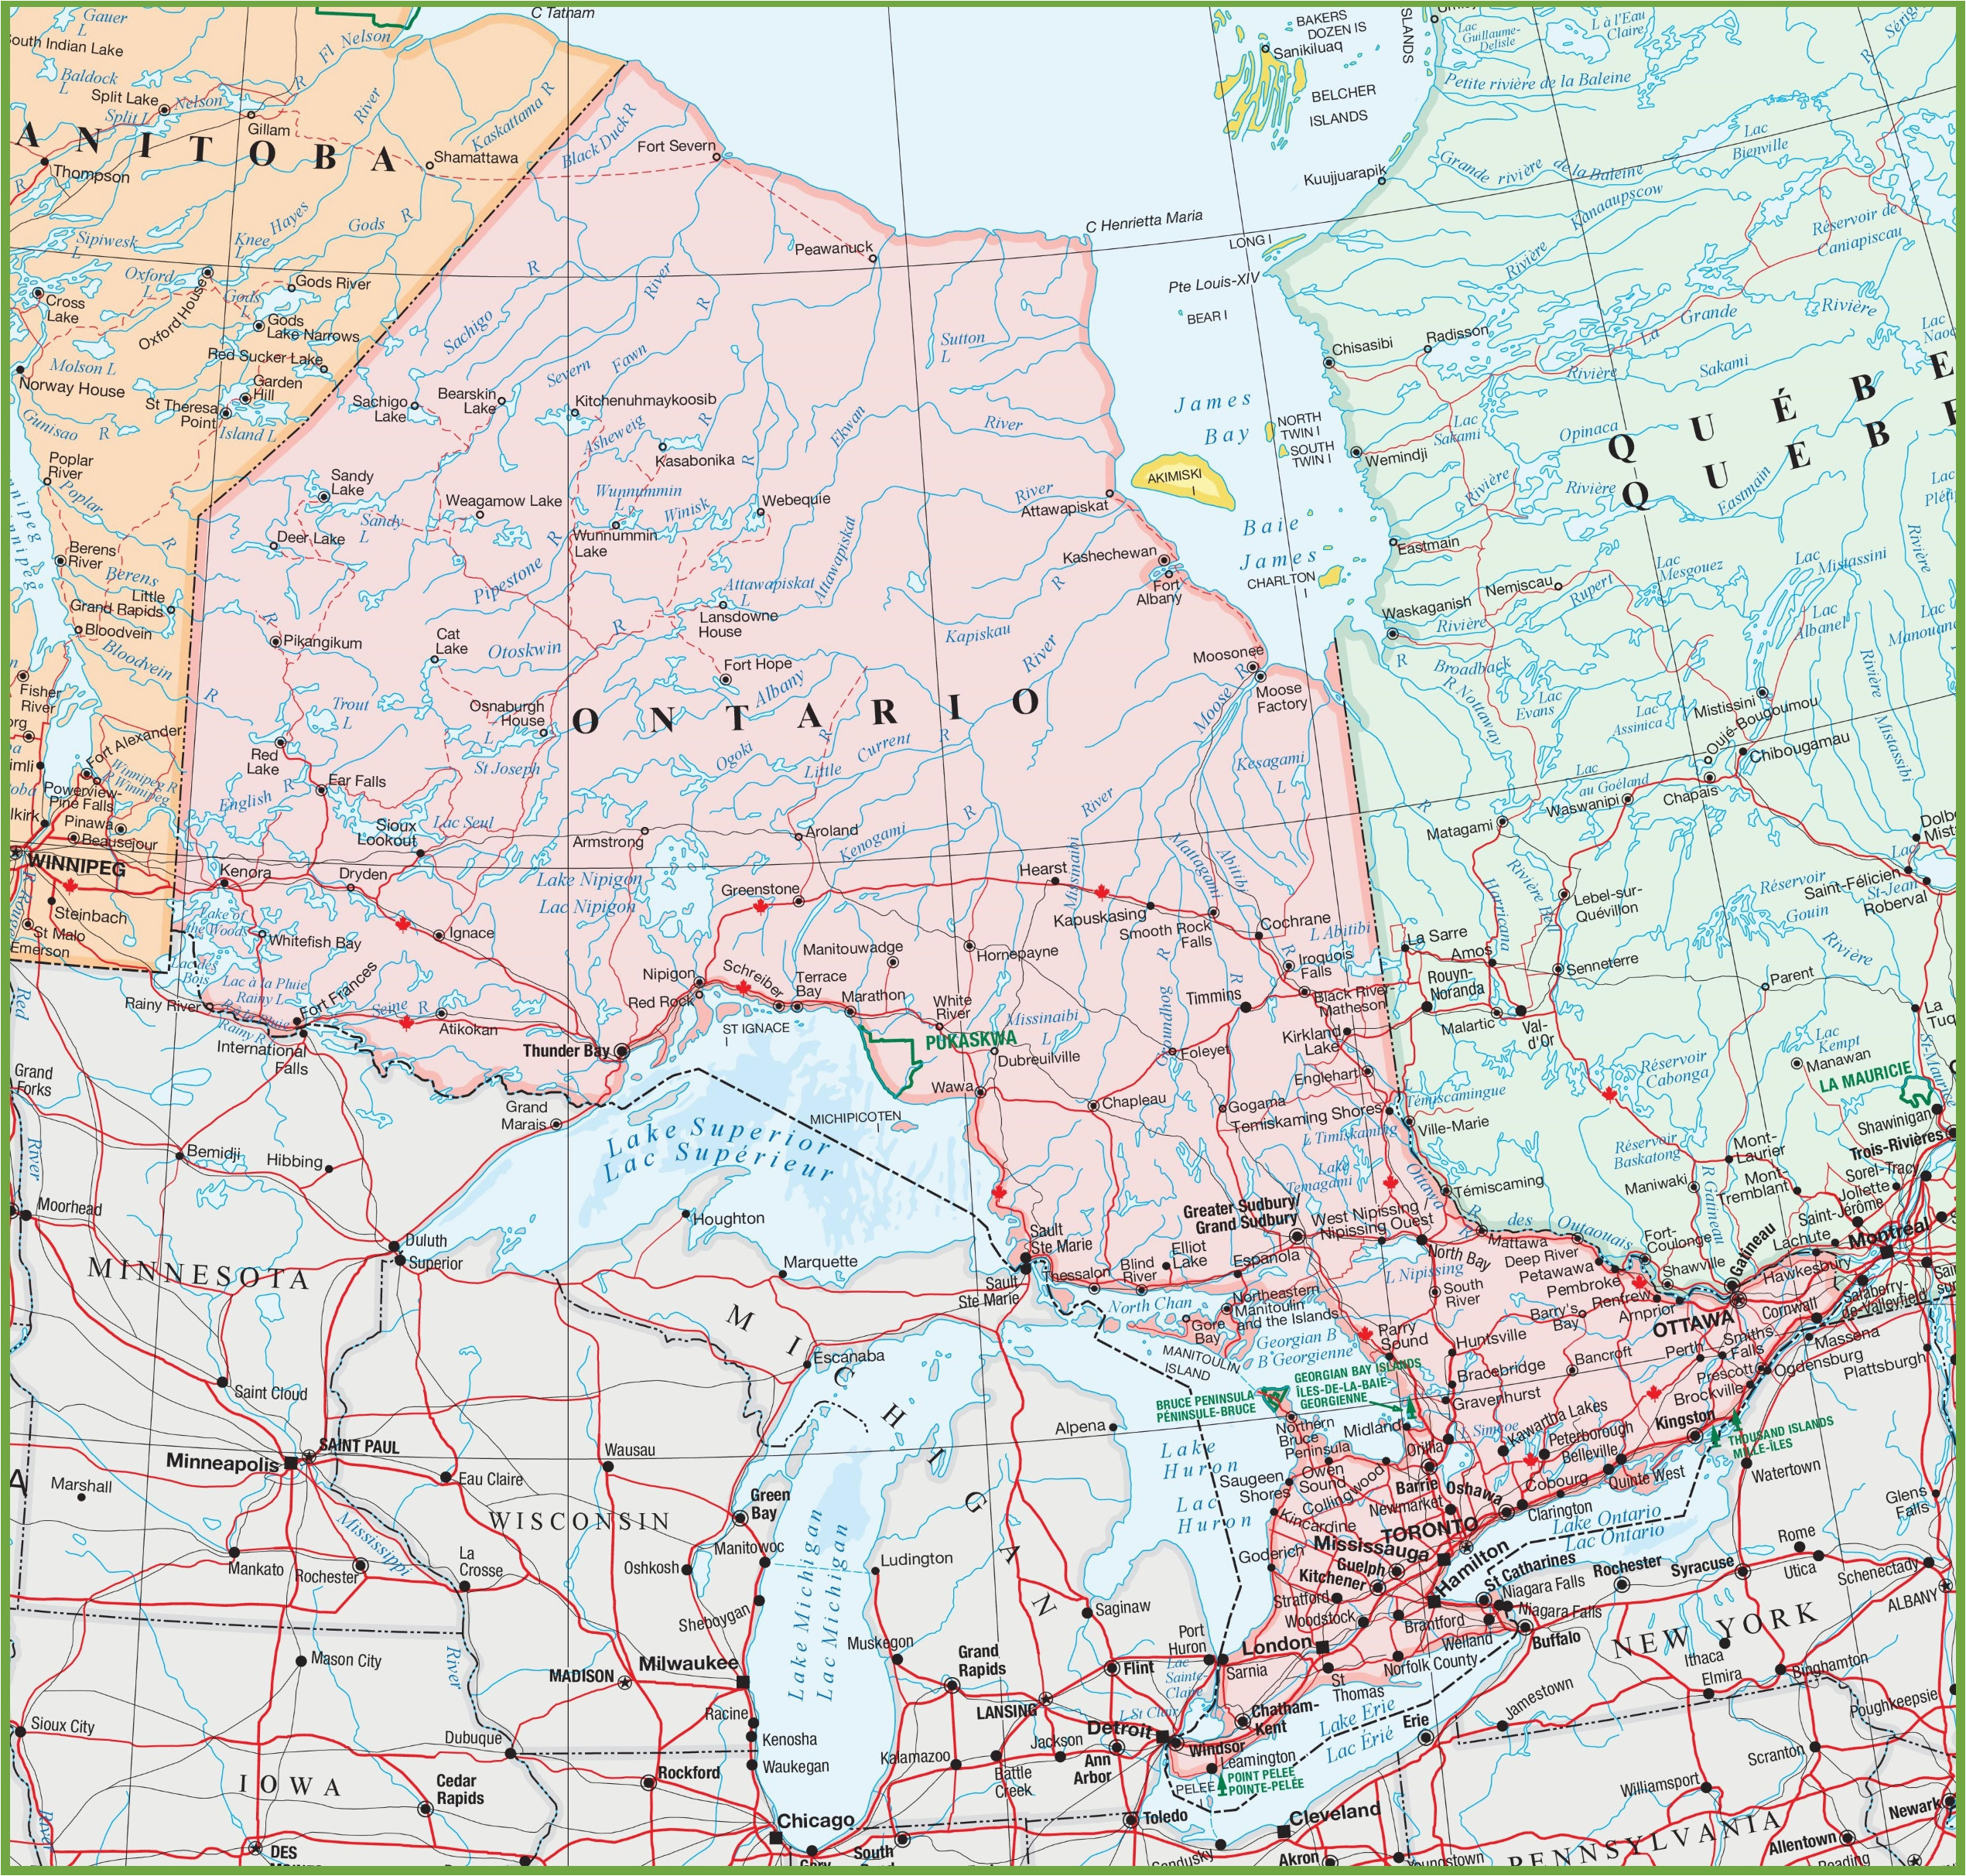 Stratford Ontario Canada Map Map Of Ontario with Cities and towns